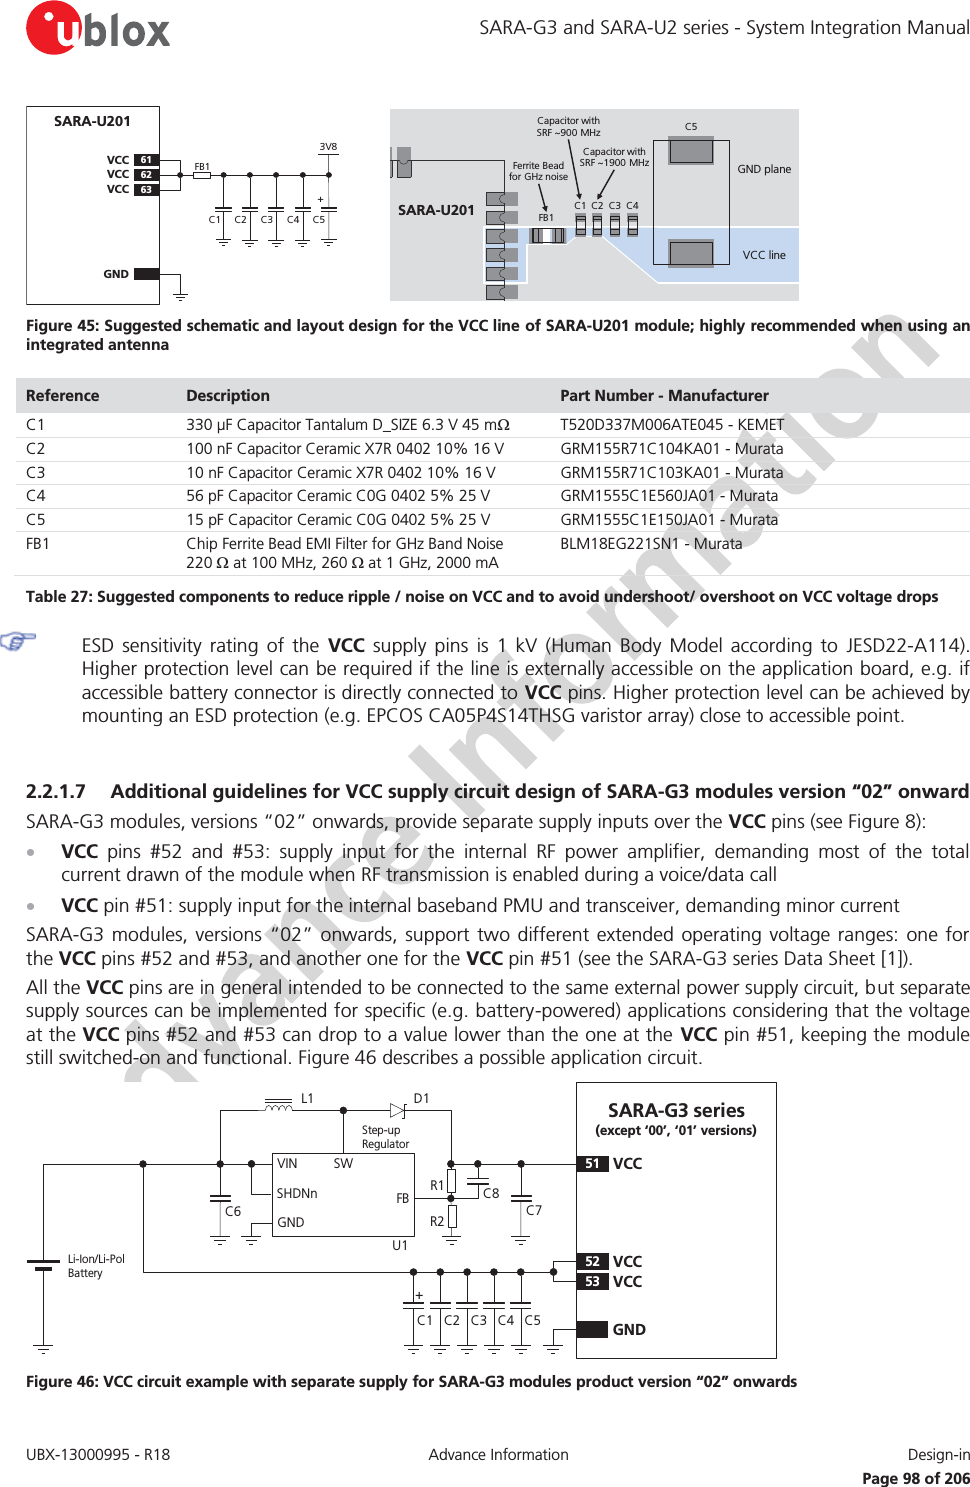 SARA-G3 and SARA-U2 series - System Integration Manual UBX-13000995 - R18  Advance Information  Design-in   Page 98 of 206 C1GNDC2 C4SARA-U20162VCC63VCC61VCC3V8C5+SARA-U201C5GND plane VCC lineCapacitor with SRF ~900 MHzFB1C1 C3 C4FB1Ferrite Bead for GHz noiseC2C3Capacitor with SRF ~1900 MHz Figure 45: Suggested schematic and layout design for the VCC line of SARA-U201 module; highly recommended when using an integrated antenna Reference  Description  Part Number - Manufacturer C1 330 μF Capacitor Tantalum D_SIZE 6.3 V 45 m: T520D337M006ATE045 - KEMET C2 100 nF Capacitor Ceramic X7R 0402 10% 16 V GRM155R71C104KA01 - Murata C3 10 nF Capacitor Ceramic X7R 0402 10% 16 V GRM155R71C103KA01 - Murata C4 56 pF Capacitor Ceramic C0G 0402 5% 25 V GRM1555C1E560JA01 - Murata C5  15 pF Capacitor Ceramic C0G 0402 5% 25 V  GRM1555C1E150JA01 - Murata FB1 Chip Ferrite Bead EMI Filter for GHz Band Noise  220 : at 100 MHz, 260 : at 1 GHz, 2000 mA BLM18EG221SN1 - Murata Table 27: Suggested components to reduce ripple / noise on VCC and to avoid undershoot/ overshoot on VCC voltage drops  ESD sensitivity rating of the VCC supply pins is 1 kV (Human Body Model according to JESD22-A114). Higher protection level can be required if the line is externally accessible on the application board, e.g. if accessible battery connector is directly connected to VCC pins. Higher protection level can be achieved by mounting an ESD protection (e.g. EPCOS CA05P4S14THSG varistor array) close to accessible point.  2.2.1.7 Additional guidelines for VCC supply circuit design of SARA-G3 modules version “02” onward SARA-G3 modules, versions “02” onwards, provide separate supply inputs over the VCC pins (see Figure 8): x VCC pins #52 and #53: supply input for the internal RF power amplifier, demanding most of the total current drawn of the module when RF transmission is enabled during a voice/data call x VCC pin #51: supply input for the internal baseband PMU and transceiver, demanding minor current  SARA-G3 modules, versions “02” onwards, support two different extended operating voltage ranges: one for the VCC pins #52 and #53, and another one for the VCC pin #51 (see the SARA-G3 series Data Sheet [1]). All the VCC pins are in general intended to be connected to the same external power supply circuit, but separate supply sources can be implemented for specific (e.g. battery-powered) applications considering that the voltage at the VCC pins #52 and #53 can drop to a value lower than the one at the VCC pin #51, keeping the module still switched-on and functional. Figure 46 describes a possible application circuit. C1 C4 GNDC3C2 C5SARA-G3 series (except ‘00’, ‘01’ versions)52 VCC53 VCC51VCC+Li-Ion/Li-Pol BatteryC6SWVINSHDNnGNDFBC7R1R2L1U1Step-up RegulatorD1C8 Figure 46: VCC circuit example with separate supply for SARA-G3 modules product version “02” onwards 